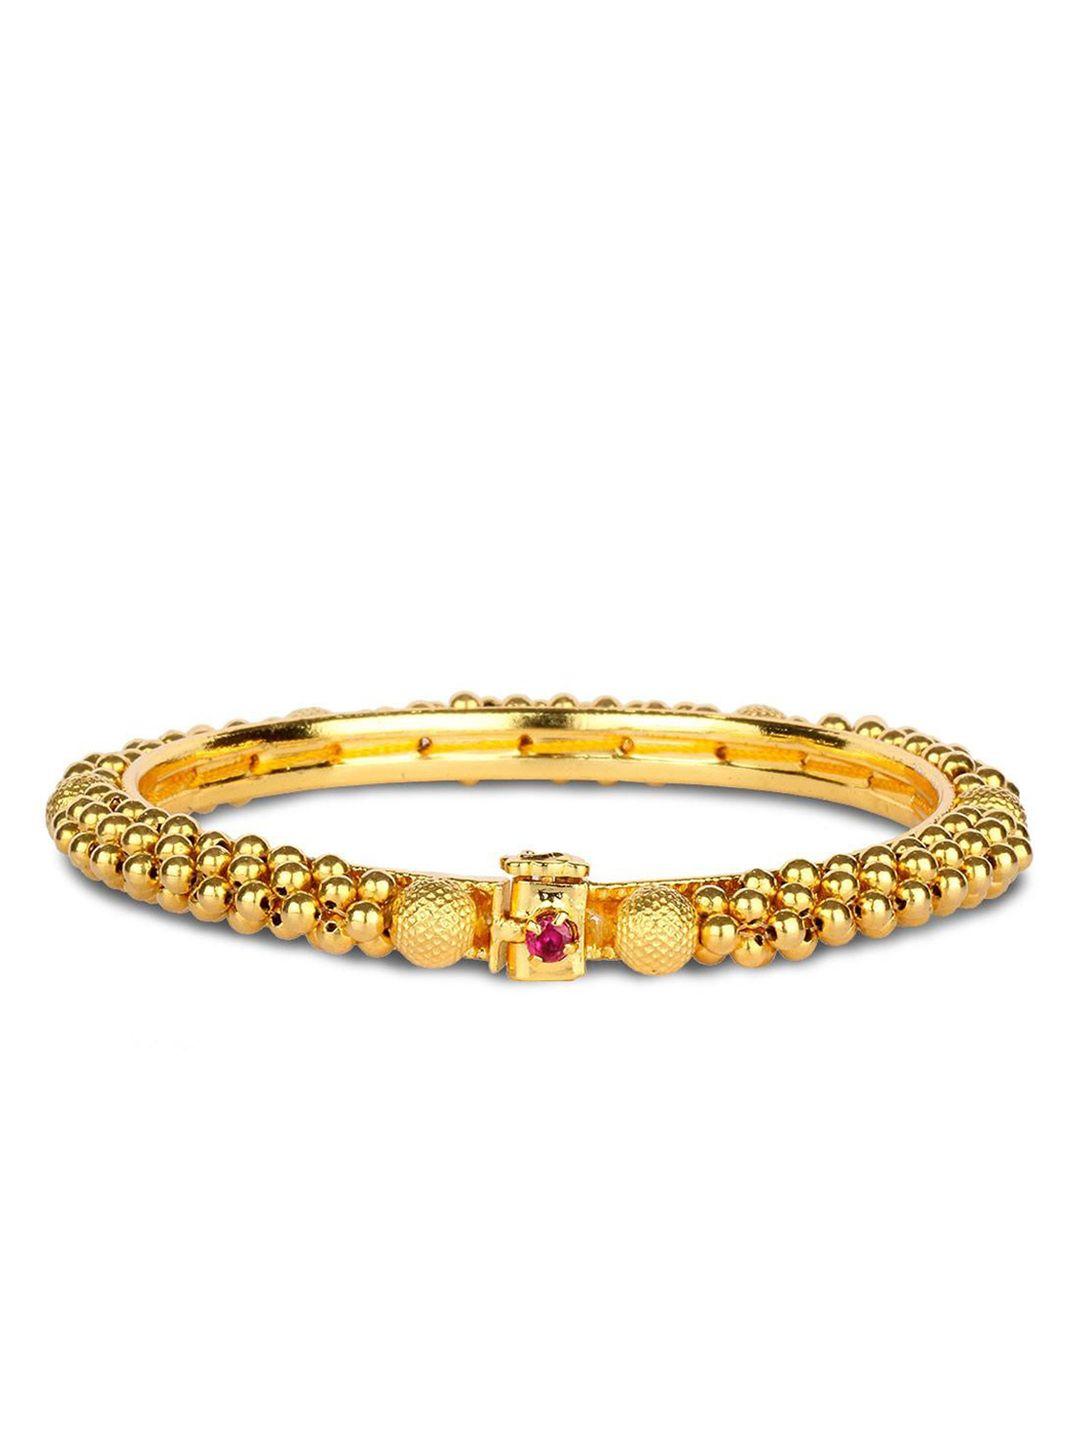 candere a kalyan jewellers company 22kt gold tushi bangle - 2.43 gm